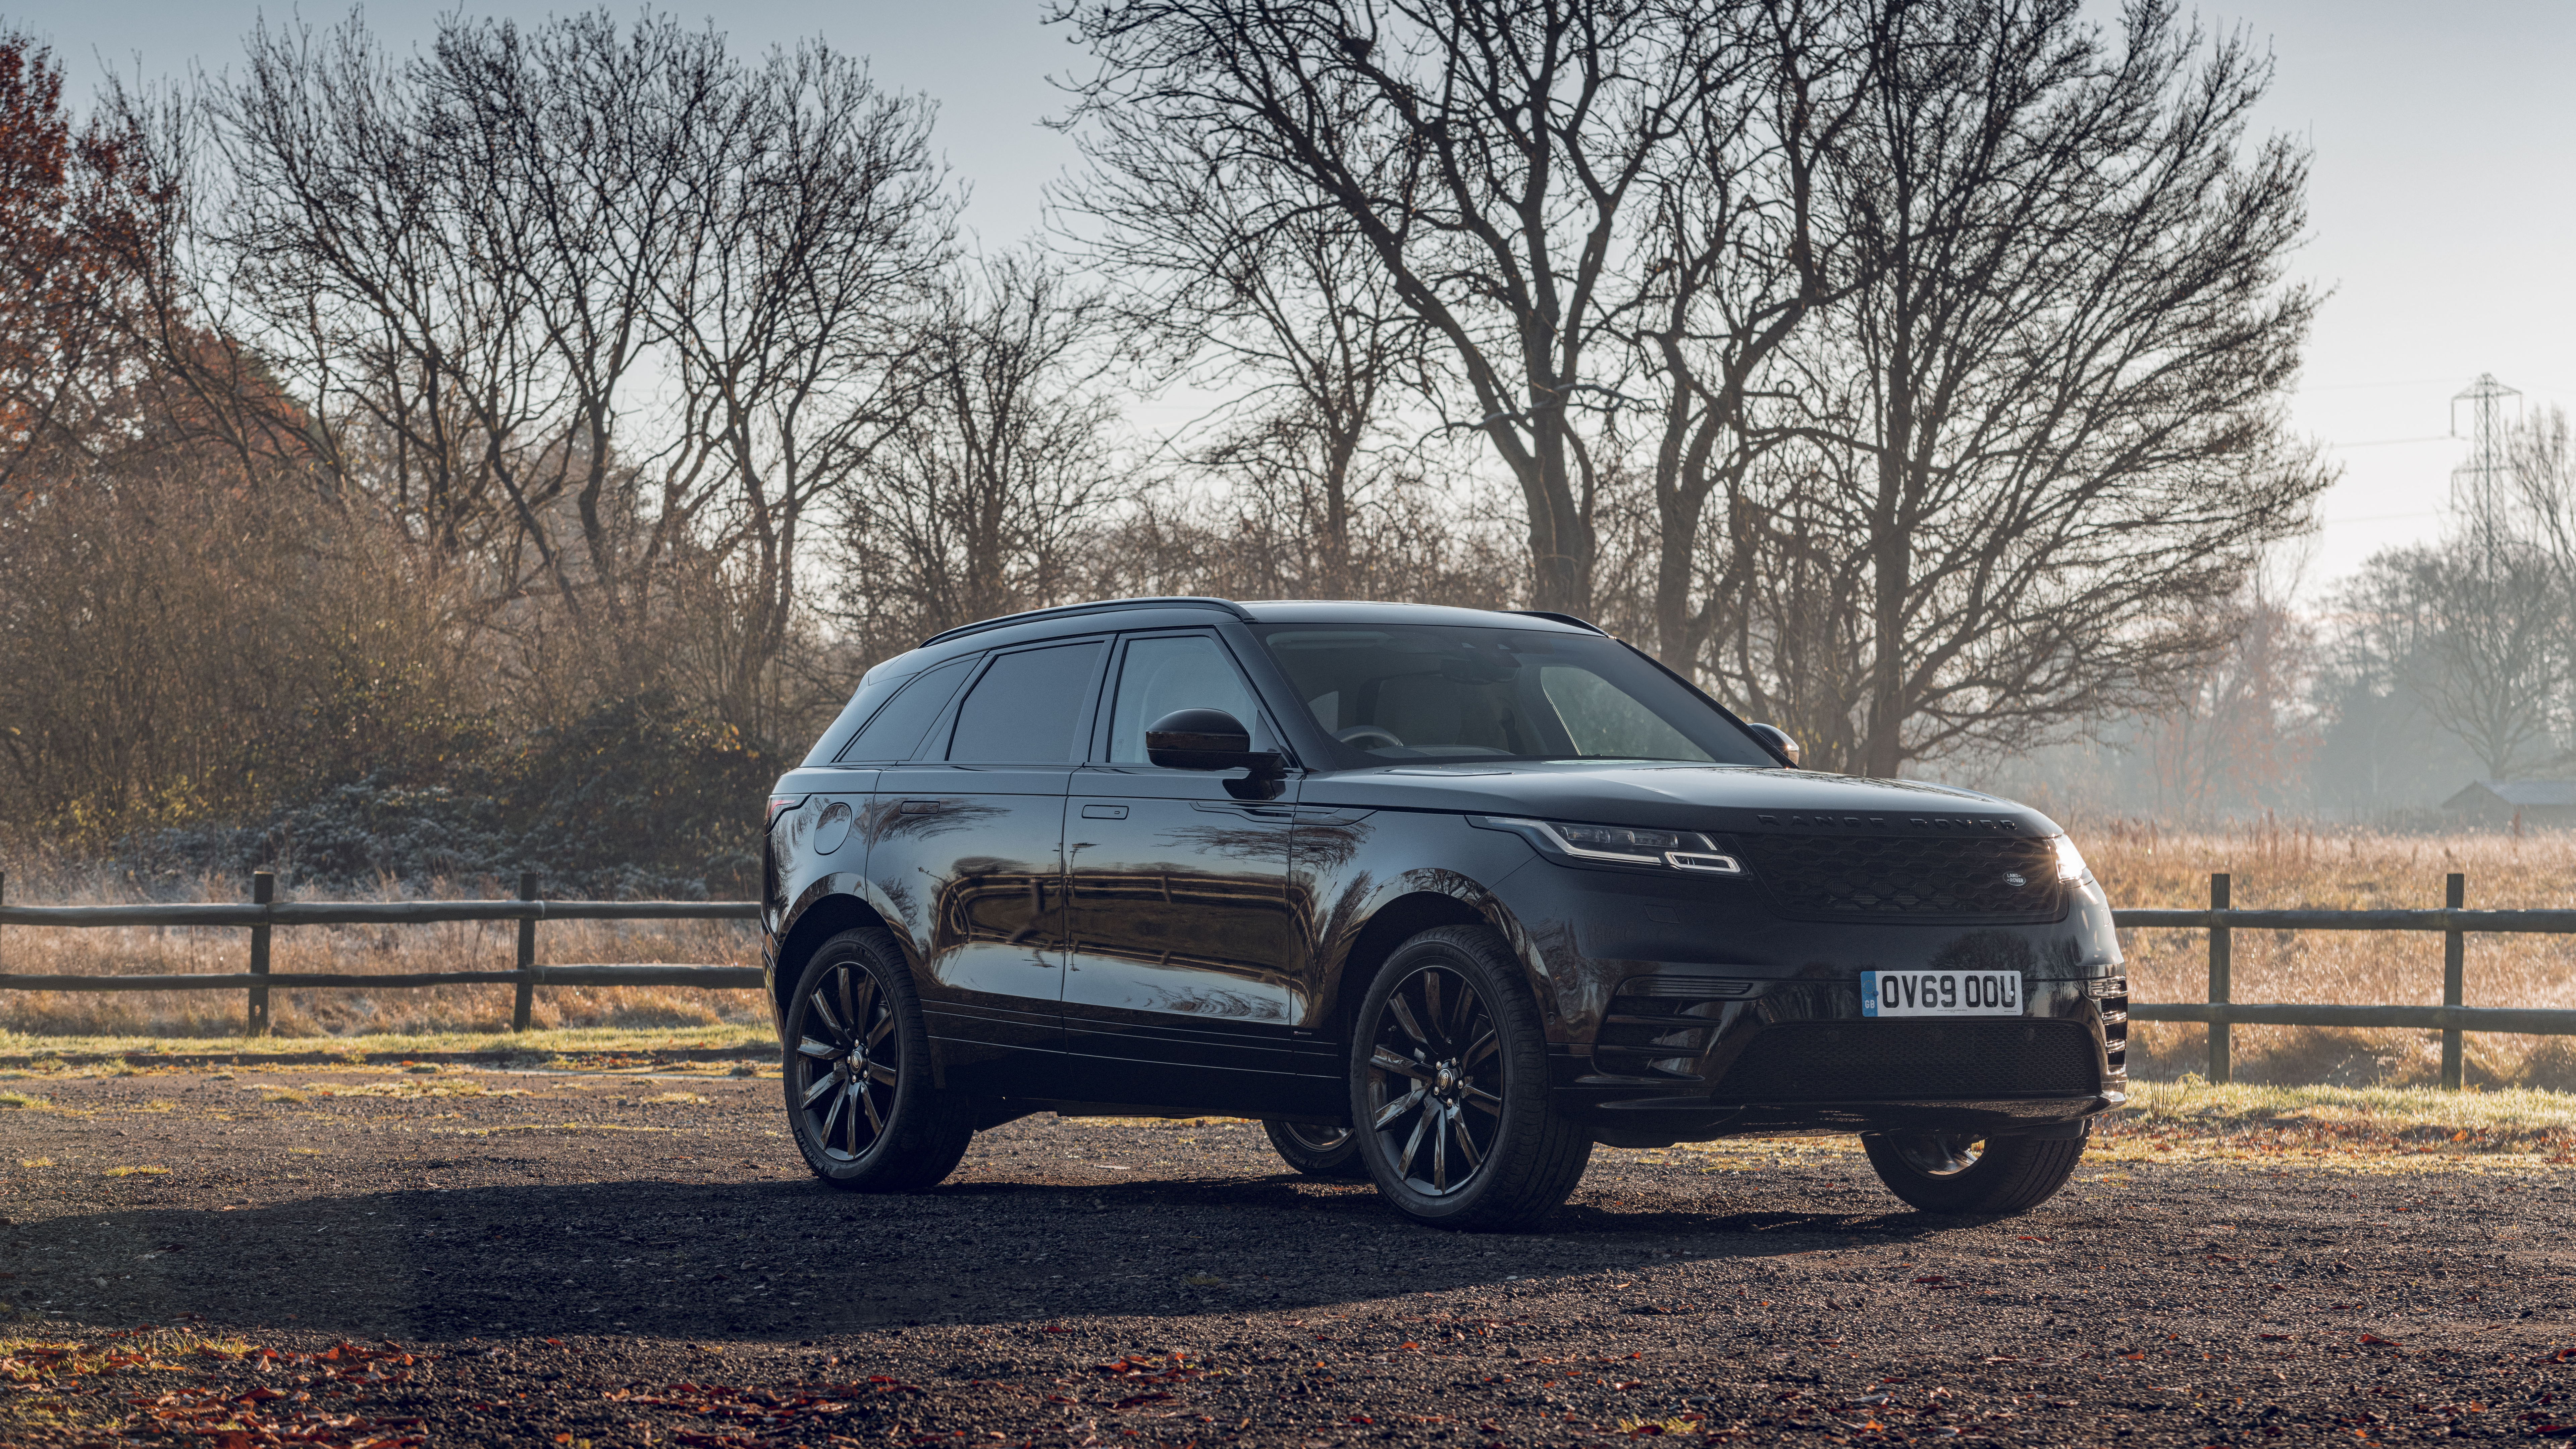 7680x4320 Black Range Rover Velar 8k 8k Hd 4k Wallpapers Images Backgrounds Photos And Pictures